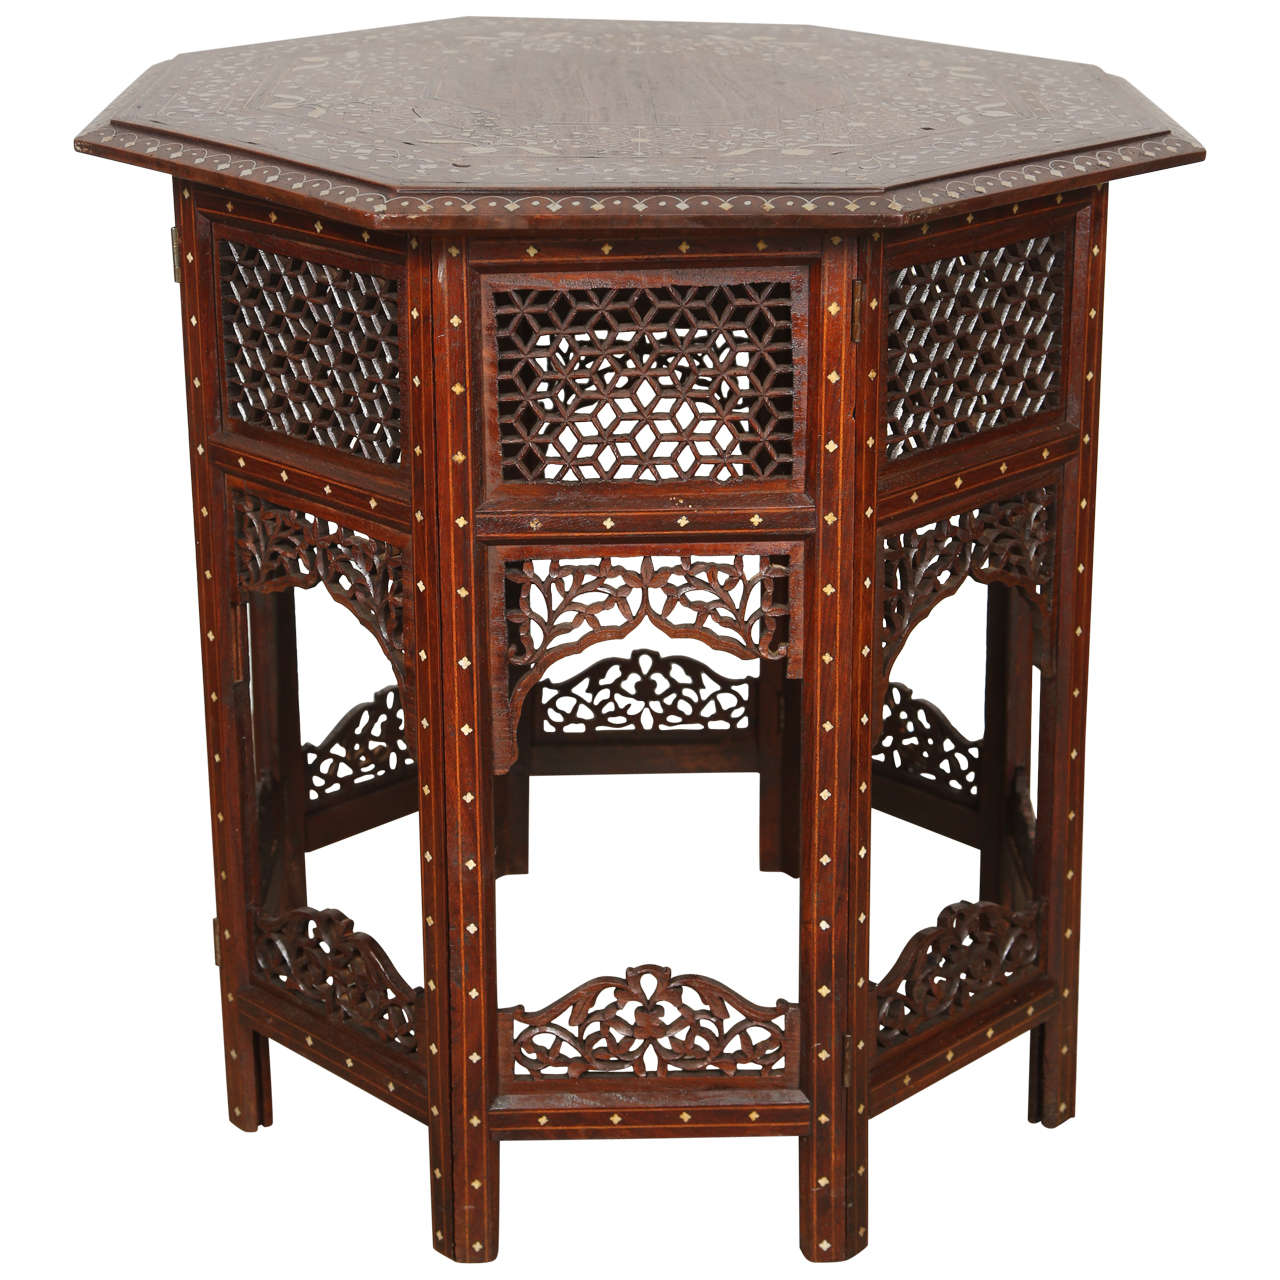 19th Century Anglo Indian Rosewood Ivory Inlaid Side Table